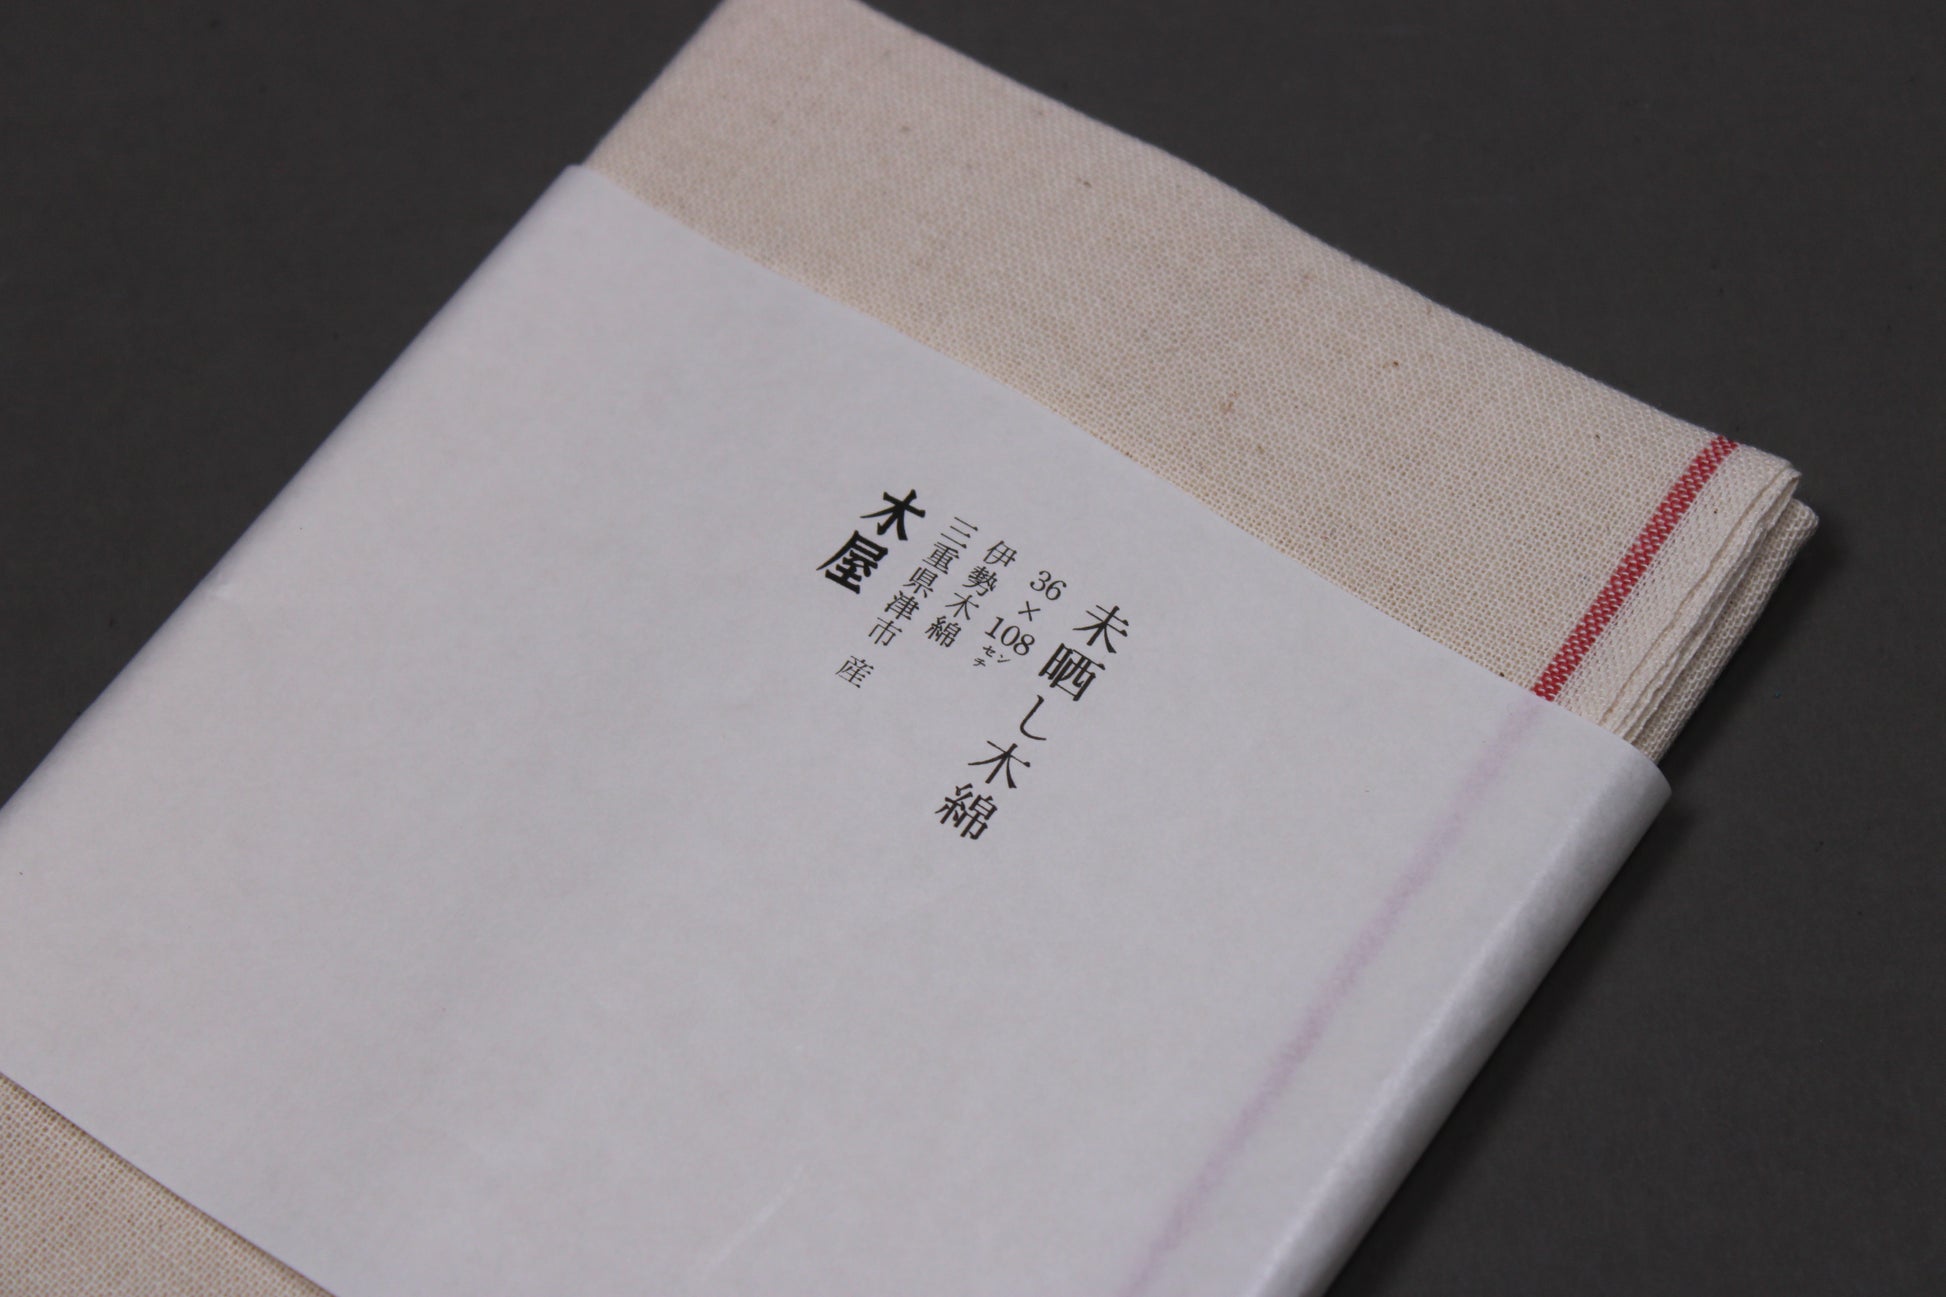 unbleached cotton cloths by kiya sarashi close up showing texture of towel and fine paper wrapping with brand name